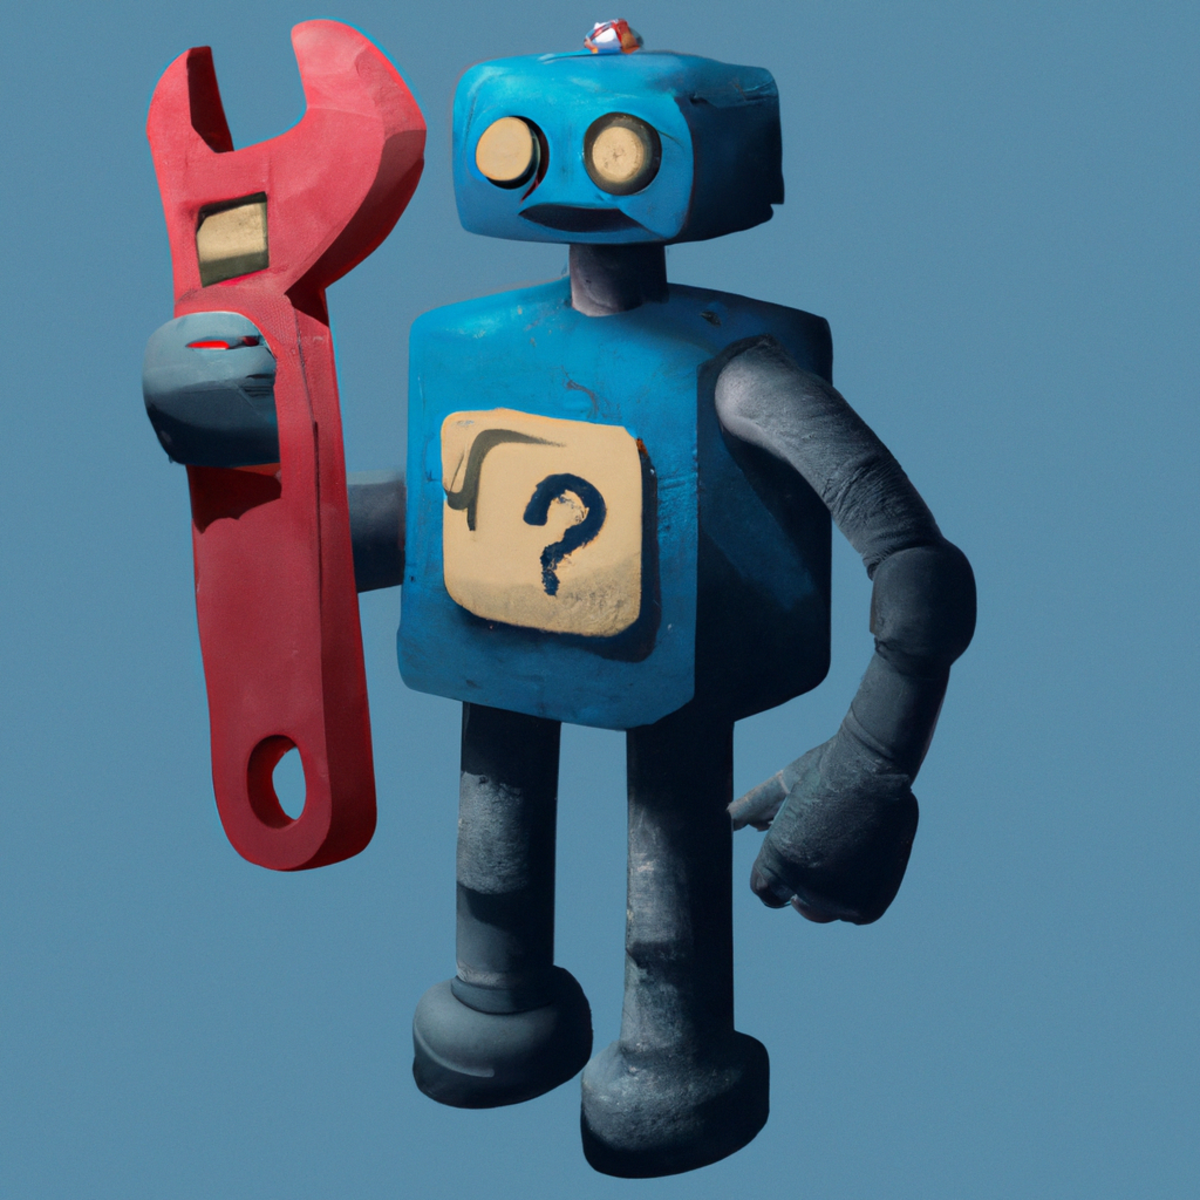 A robot plumber holding a wrench, symbolizing AI in the plumbing industry.